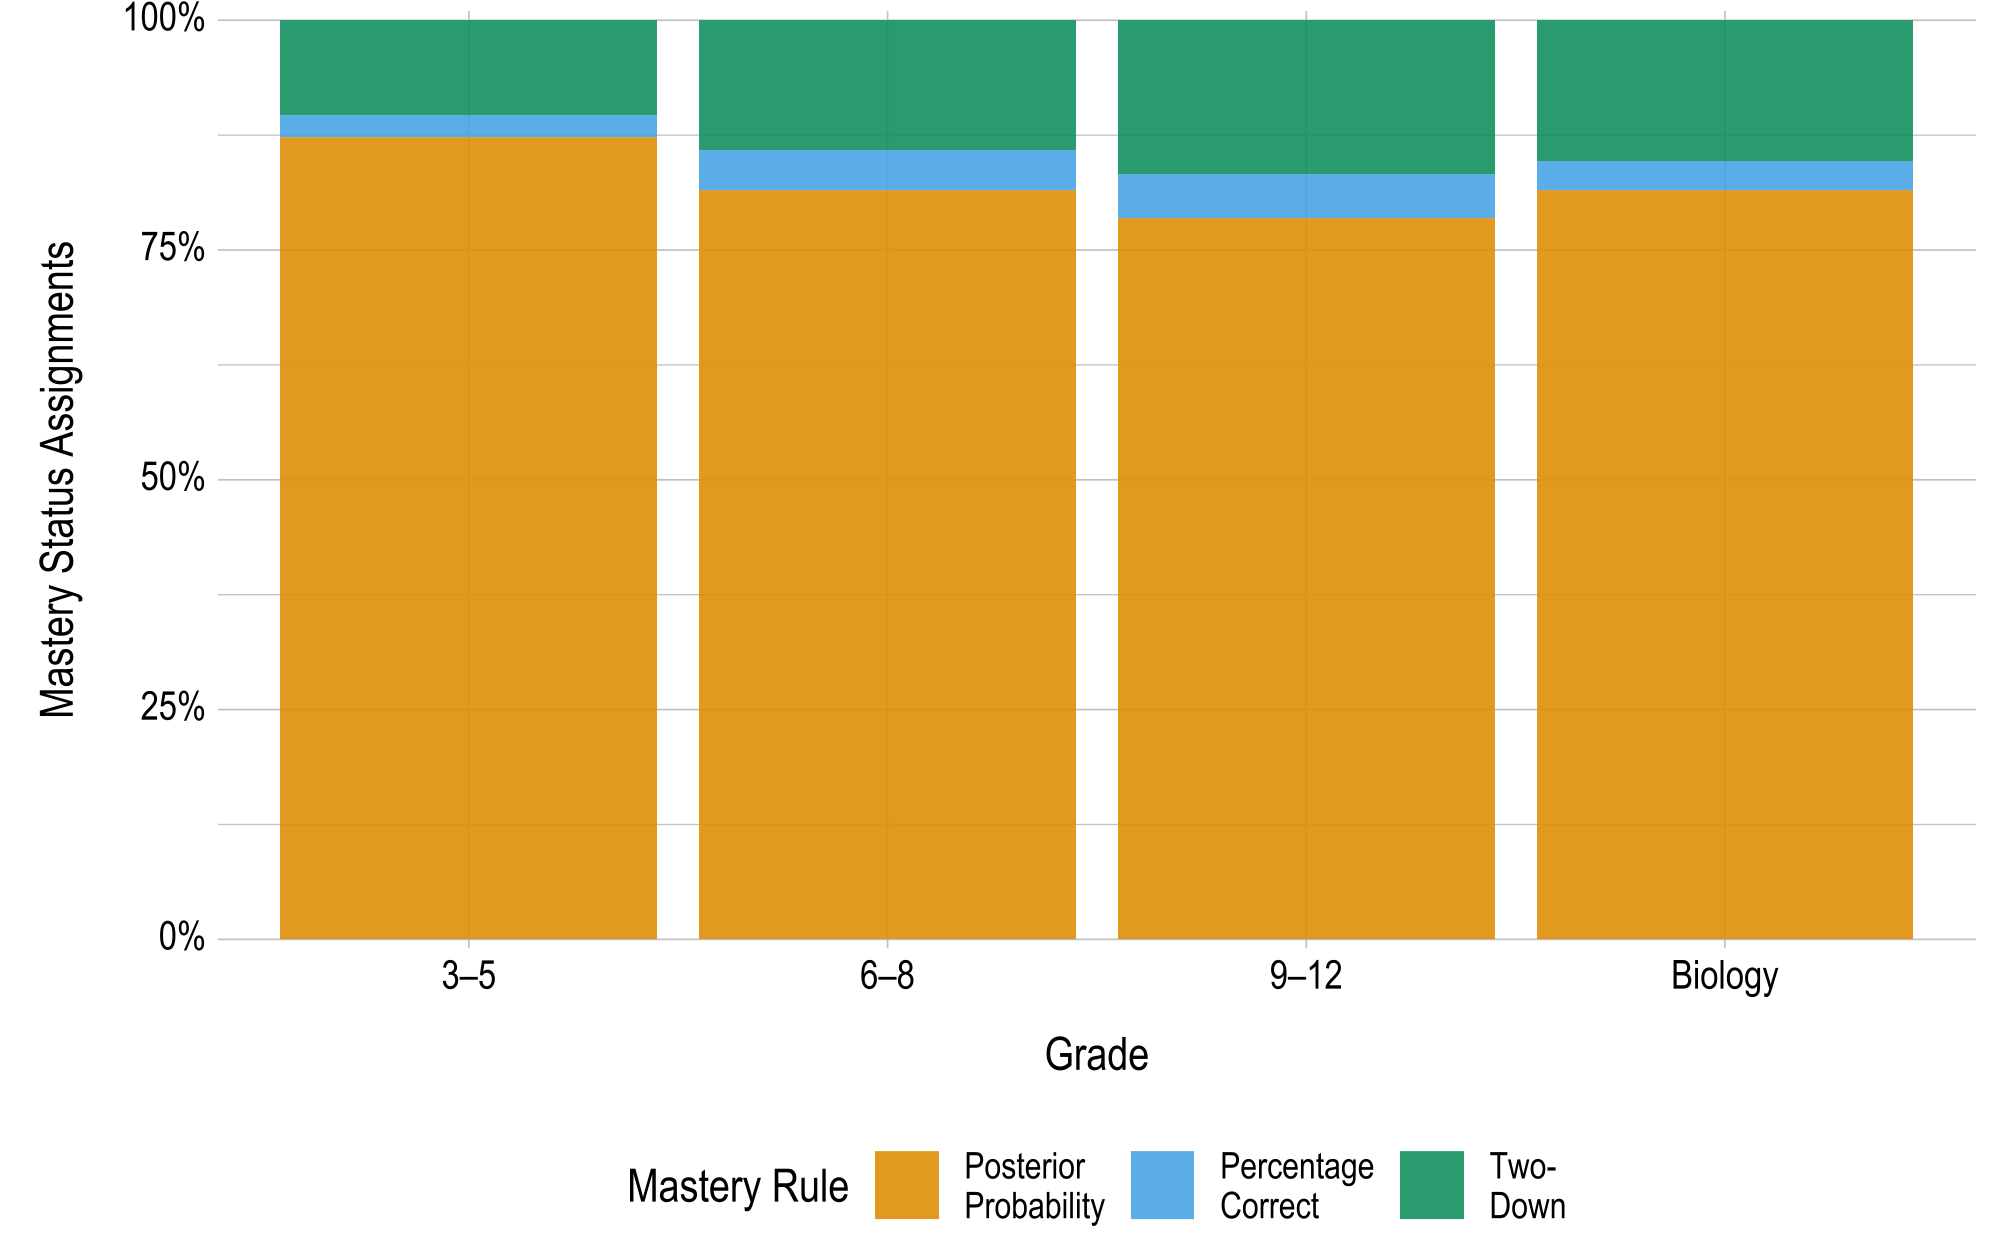 A set of stacked bar charts. There is a bar chart for each grade, and the stacks within each bar chart represent a mastery rule and the percentage of mastery statuses obtained by each scoring rule. The highest percentage of linkage level mastery assignment across all grades is for the posterior probability mastery rule.